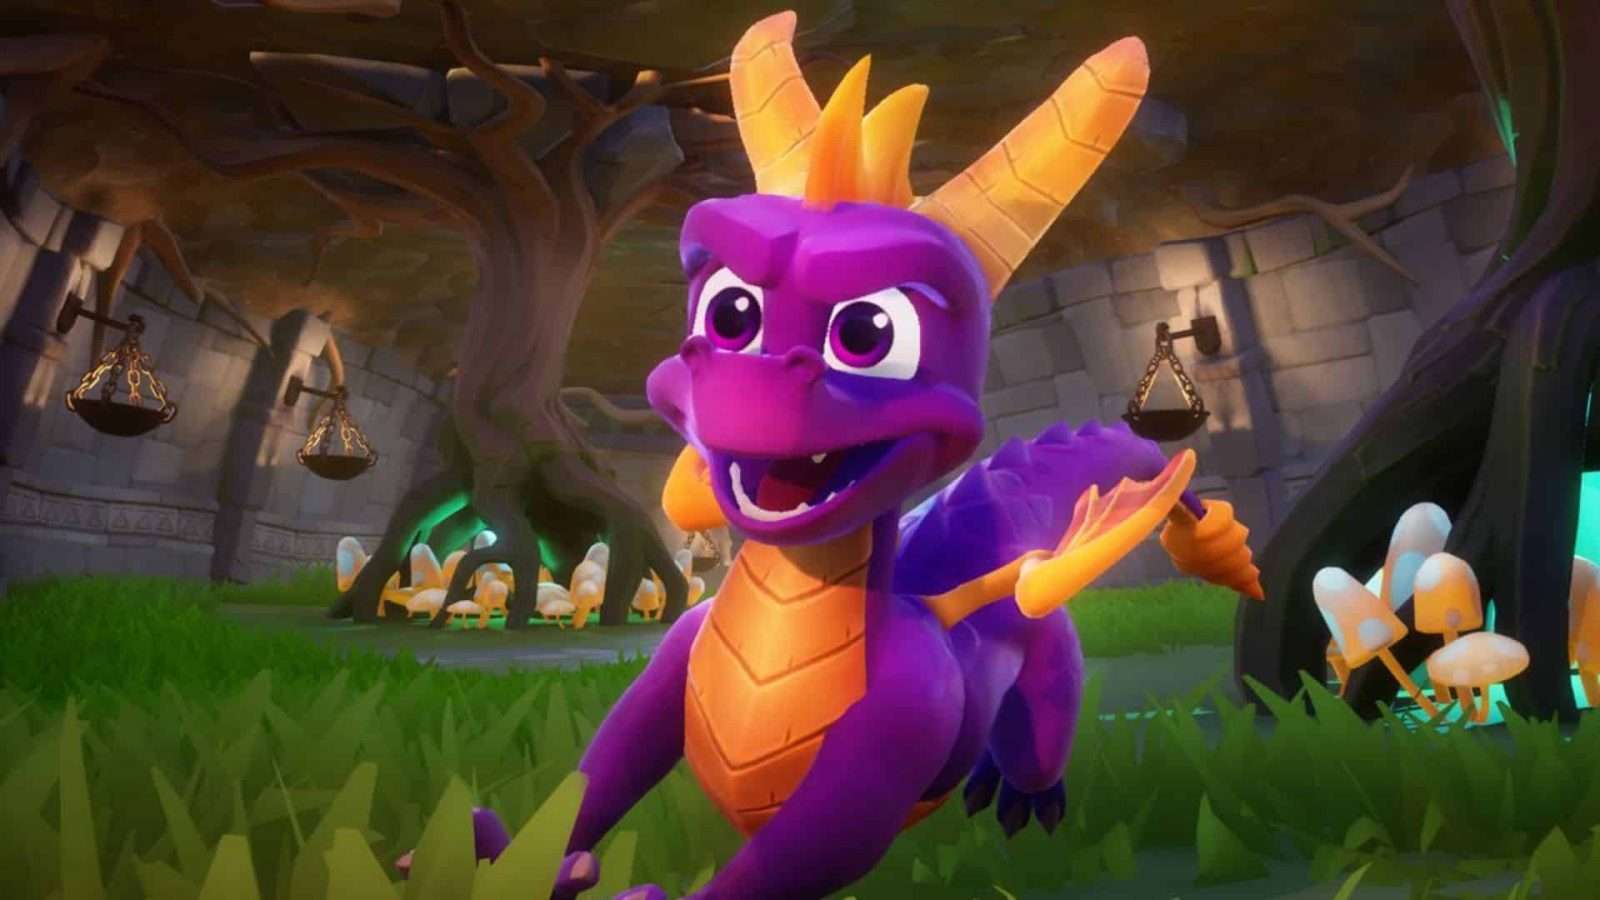 spyro the dragon running and smiling